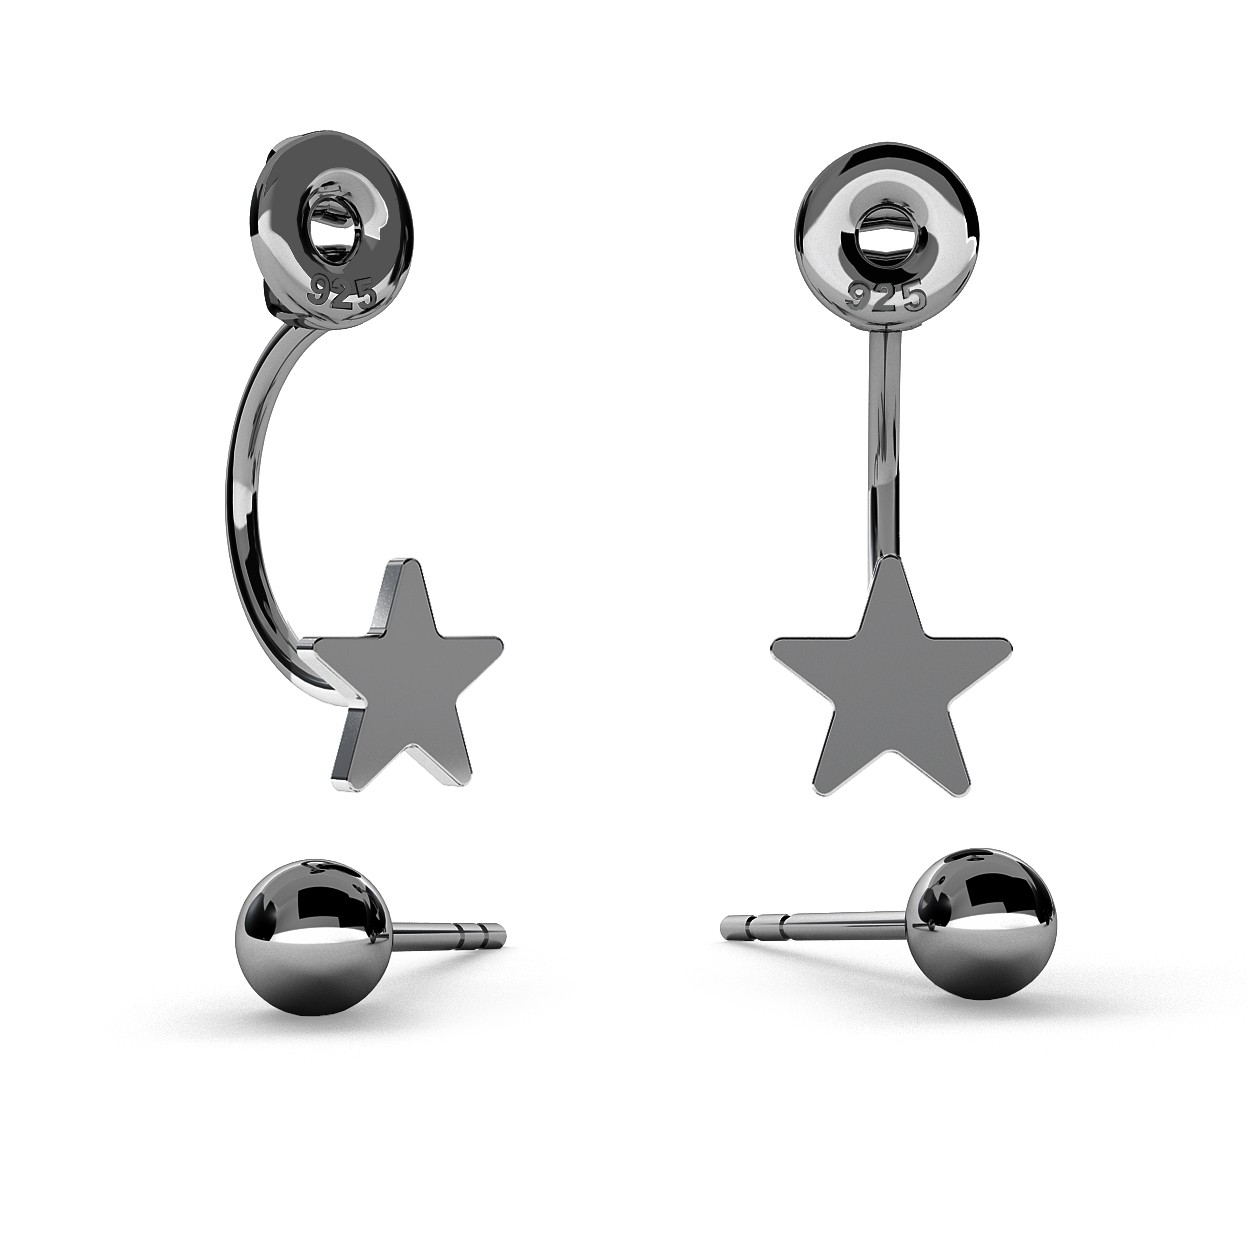 SWING EARRINGS BALL & STAR WITH ENGRAVE